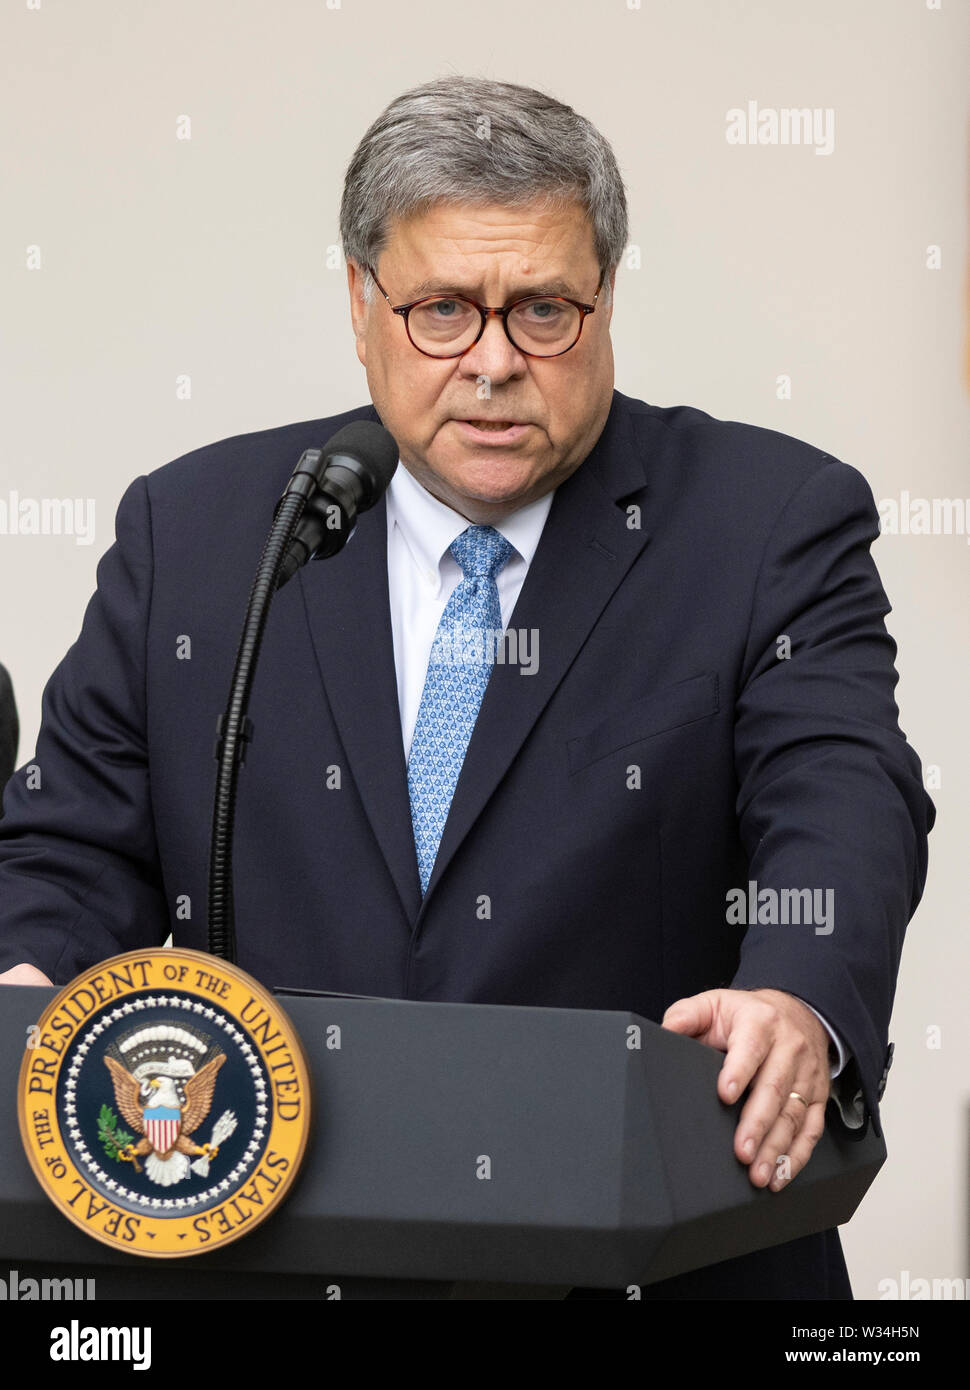 United States Attorney General William P. Barr speaks after US President Donald J. Trump delivered remarks on citizenship and the census in the Rose Garden of the White House in Washington, DC on Thursday, July 11, 2019.Credit: Ron Sachs/CNP /MediaPunch Stock Photo